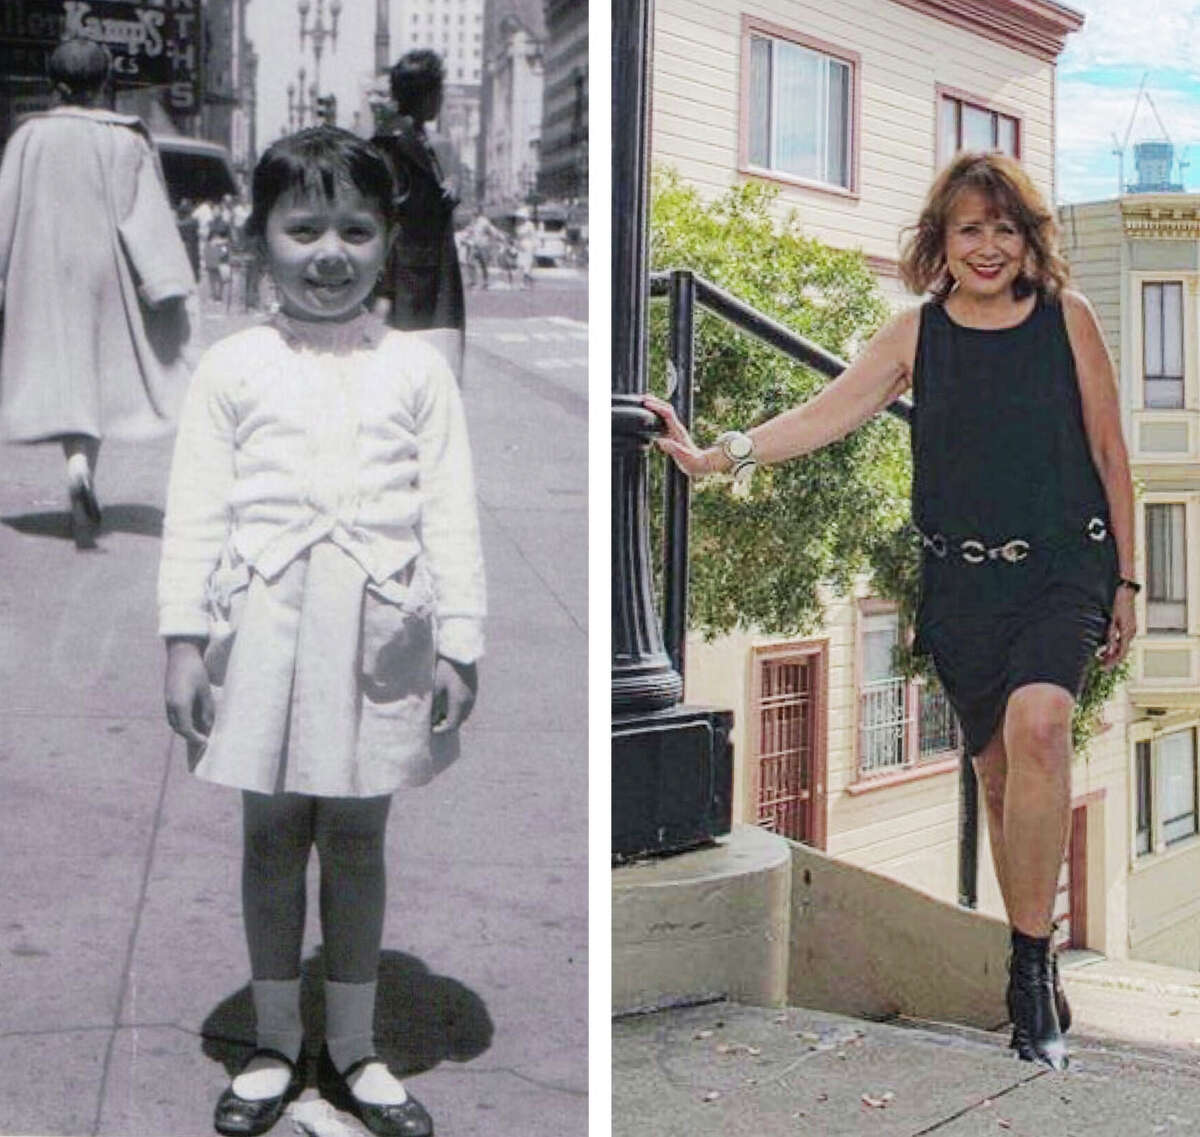 Denise Webster, as a child and an adult, in San Francisco.